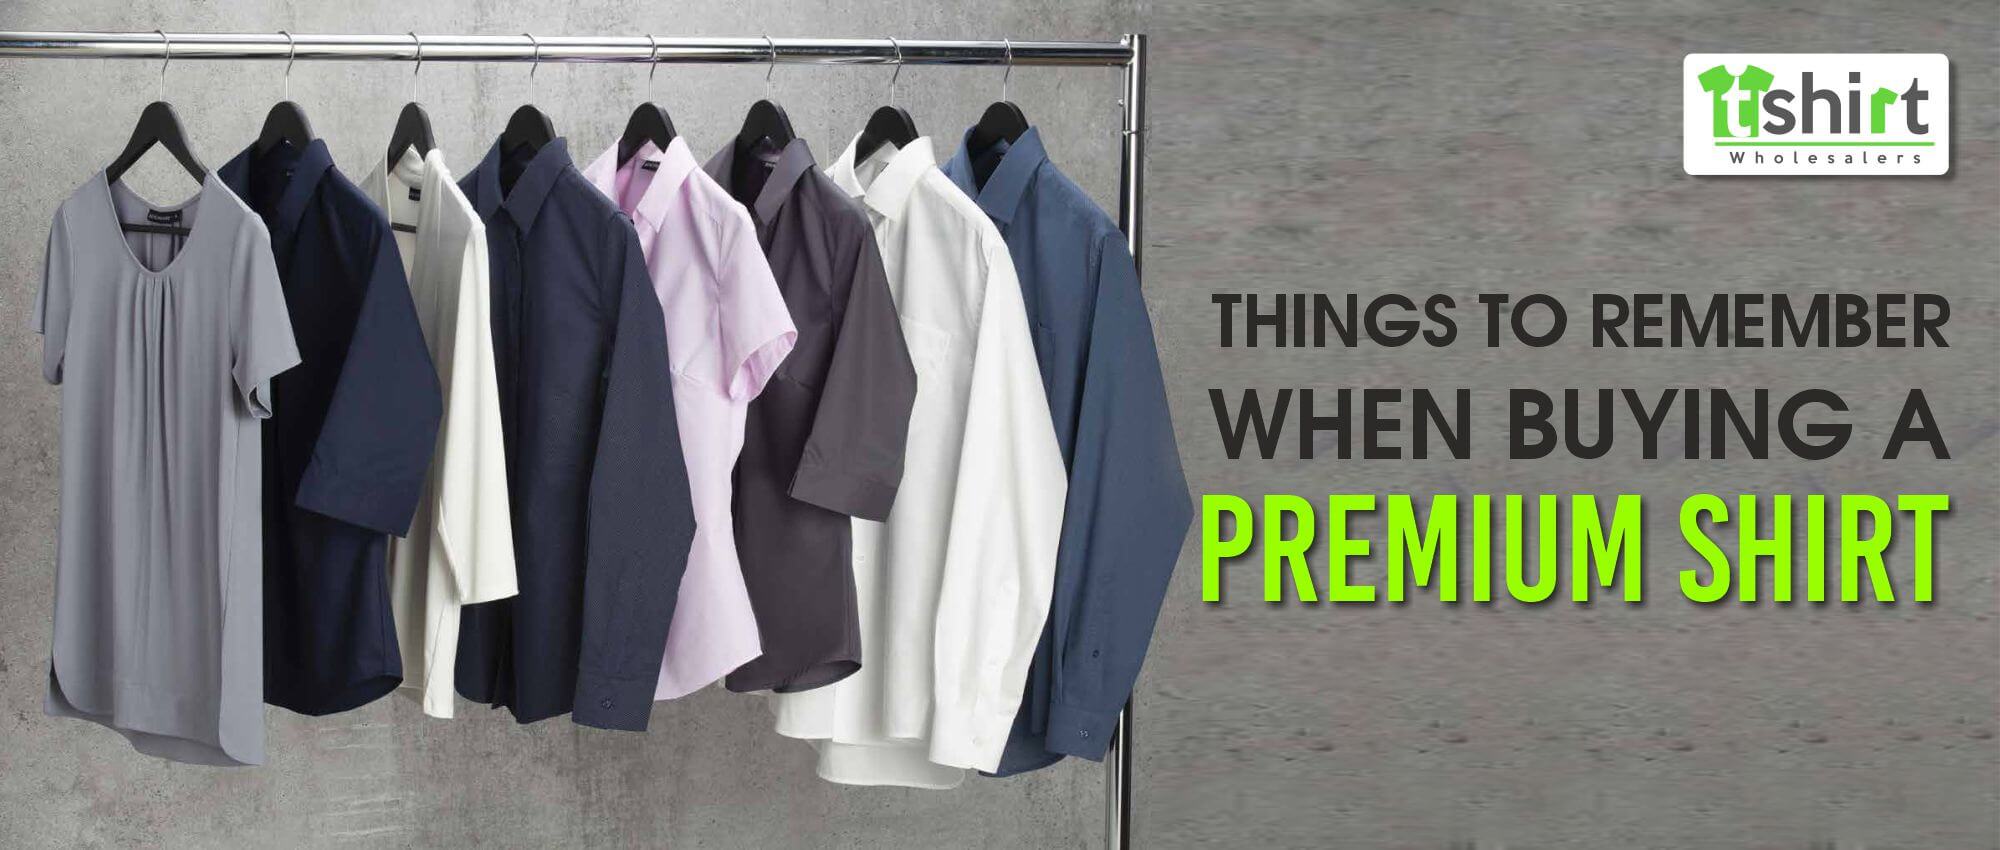 THINGS TO REMEMBER WHEN BUYING A PREMIUM SHIRT